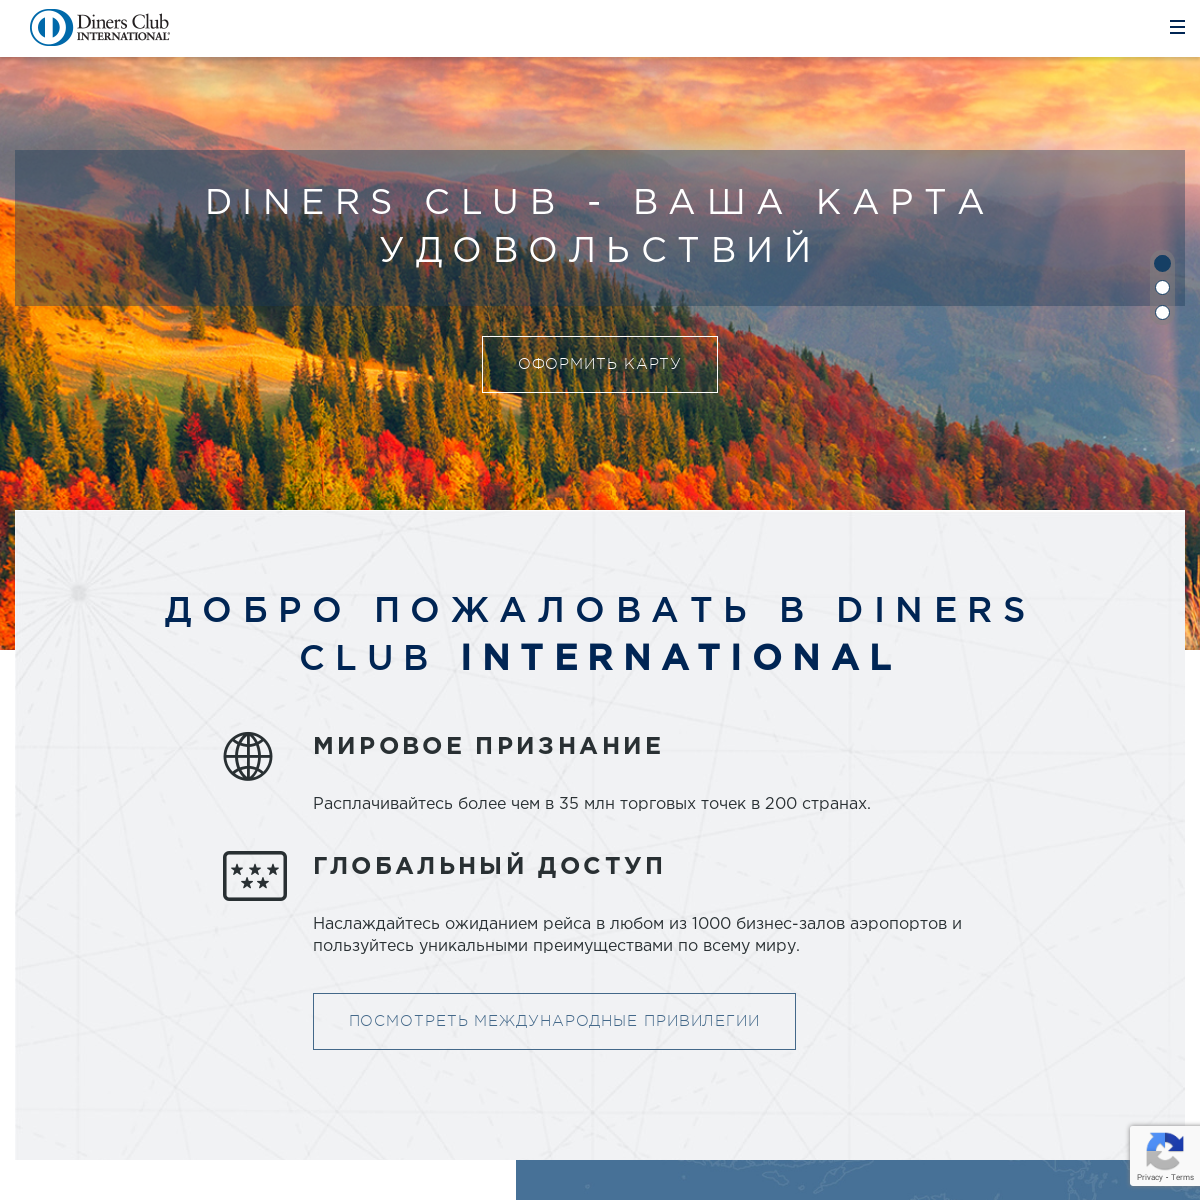 A complete backup of dinersclubcard.ru